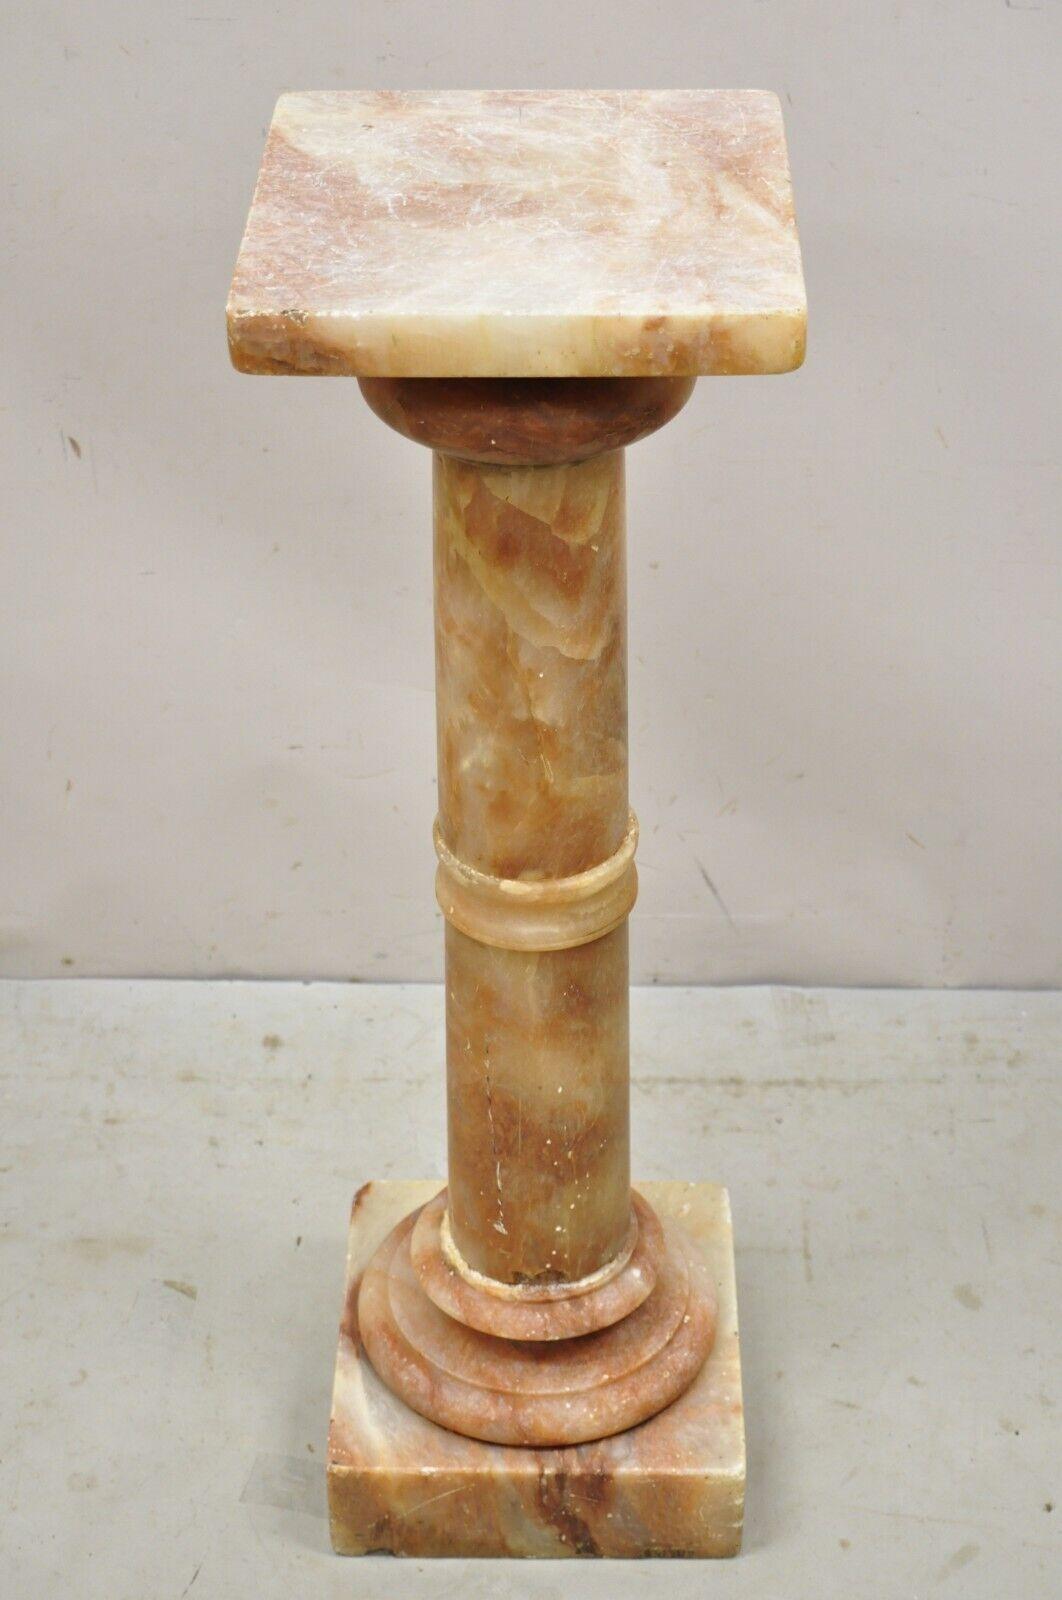 Antique Italian Classical Rouge Onyx stone marble column pedestal stand. Item features rouge translucent onyx stone, square top, beautiful veins, very nice antique item. Circa Early 1900s. Measurements: 38.5